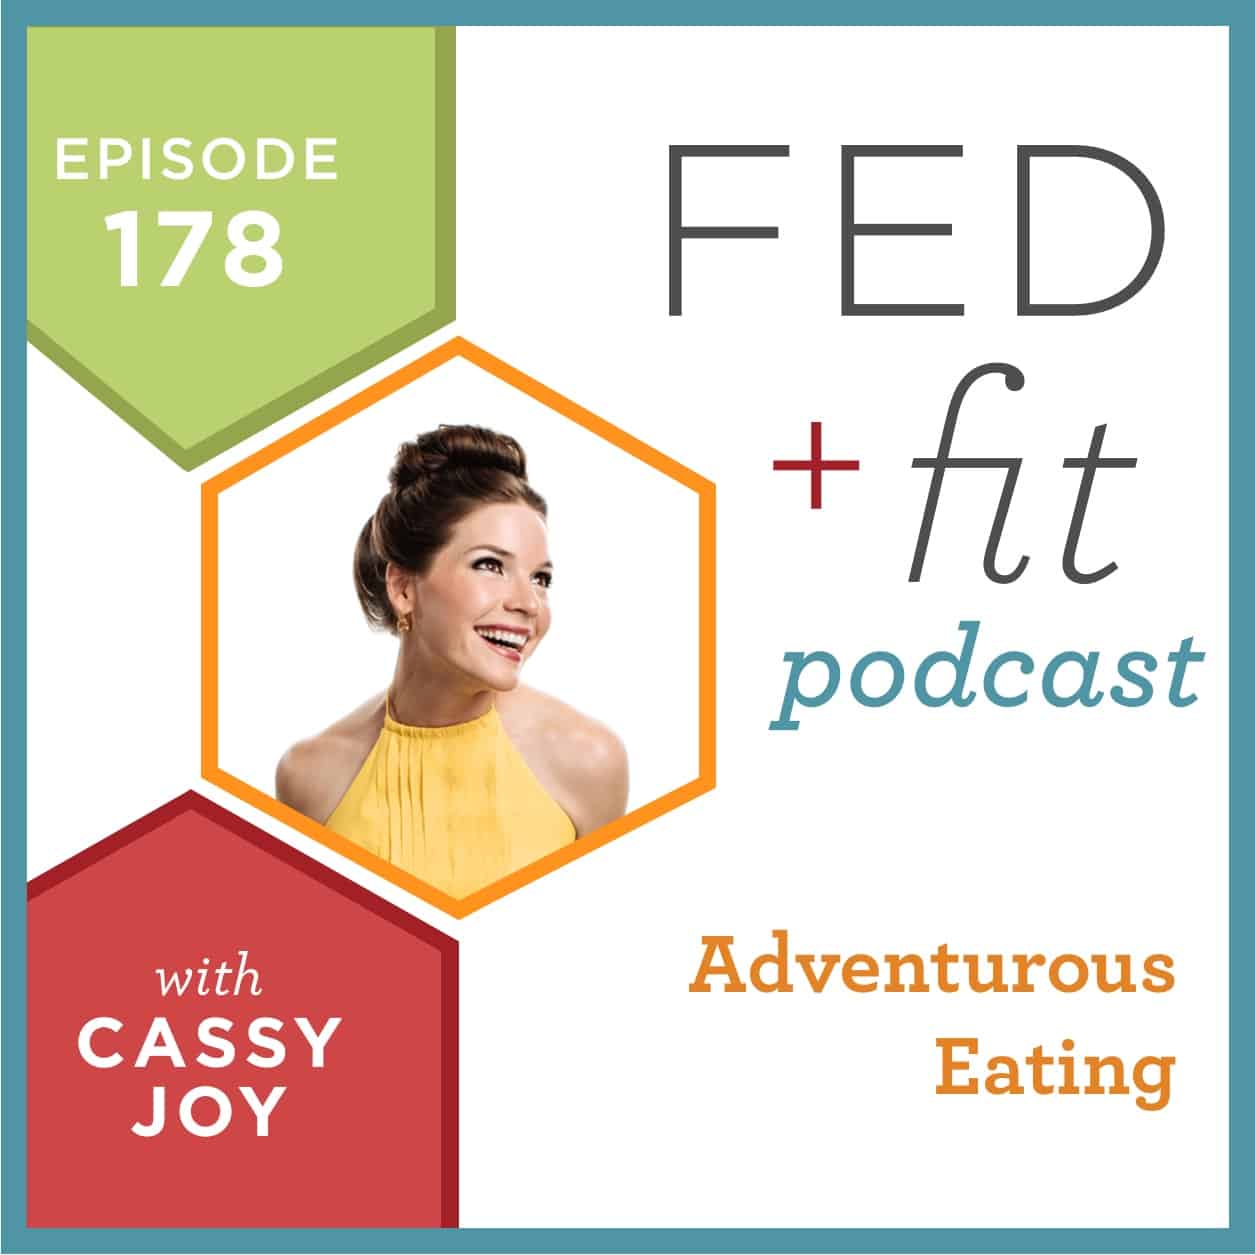 Fed and Fit podcast graphic, episode 178 Adventurous Eating with Cassy Joy